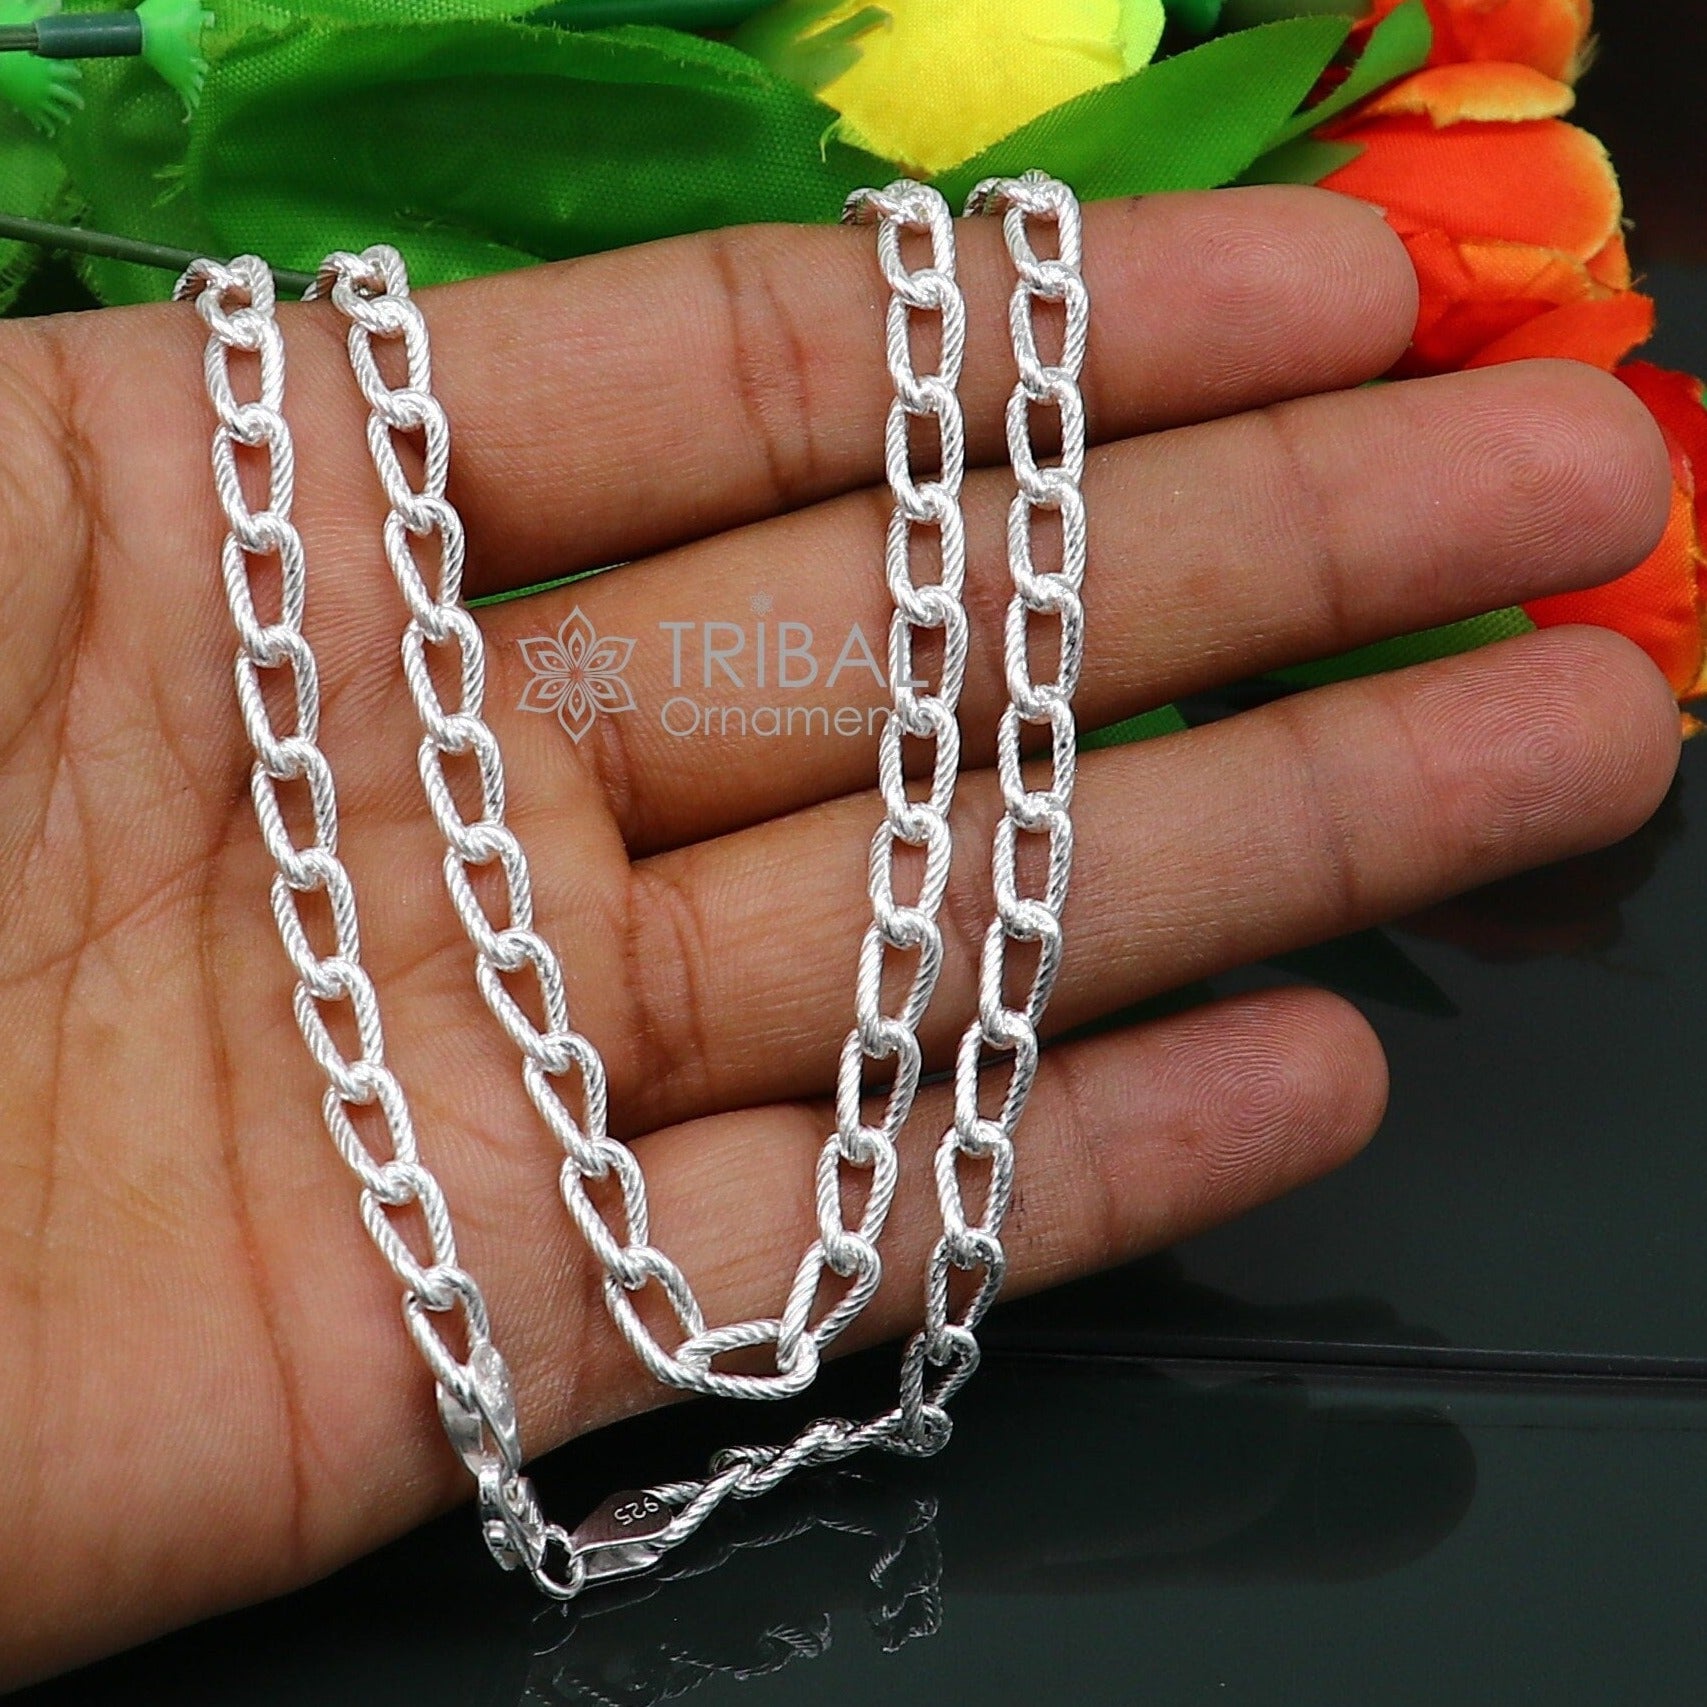 New 925 Sterling Silver Link chain Necklace 20”inches 2MM | eBay